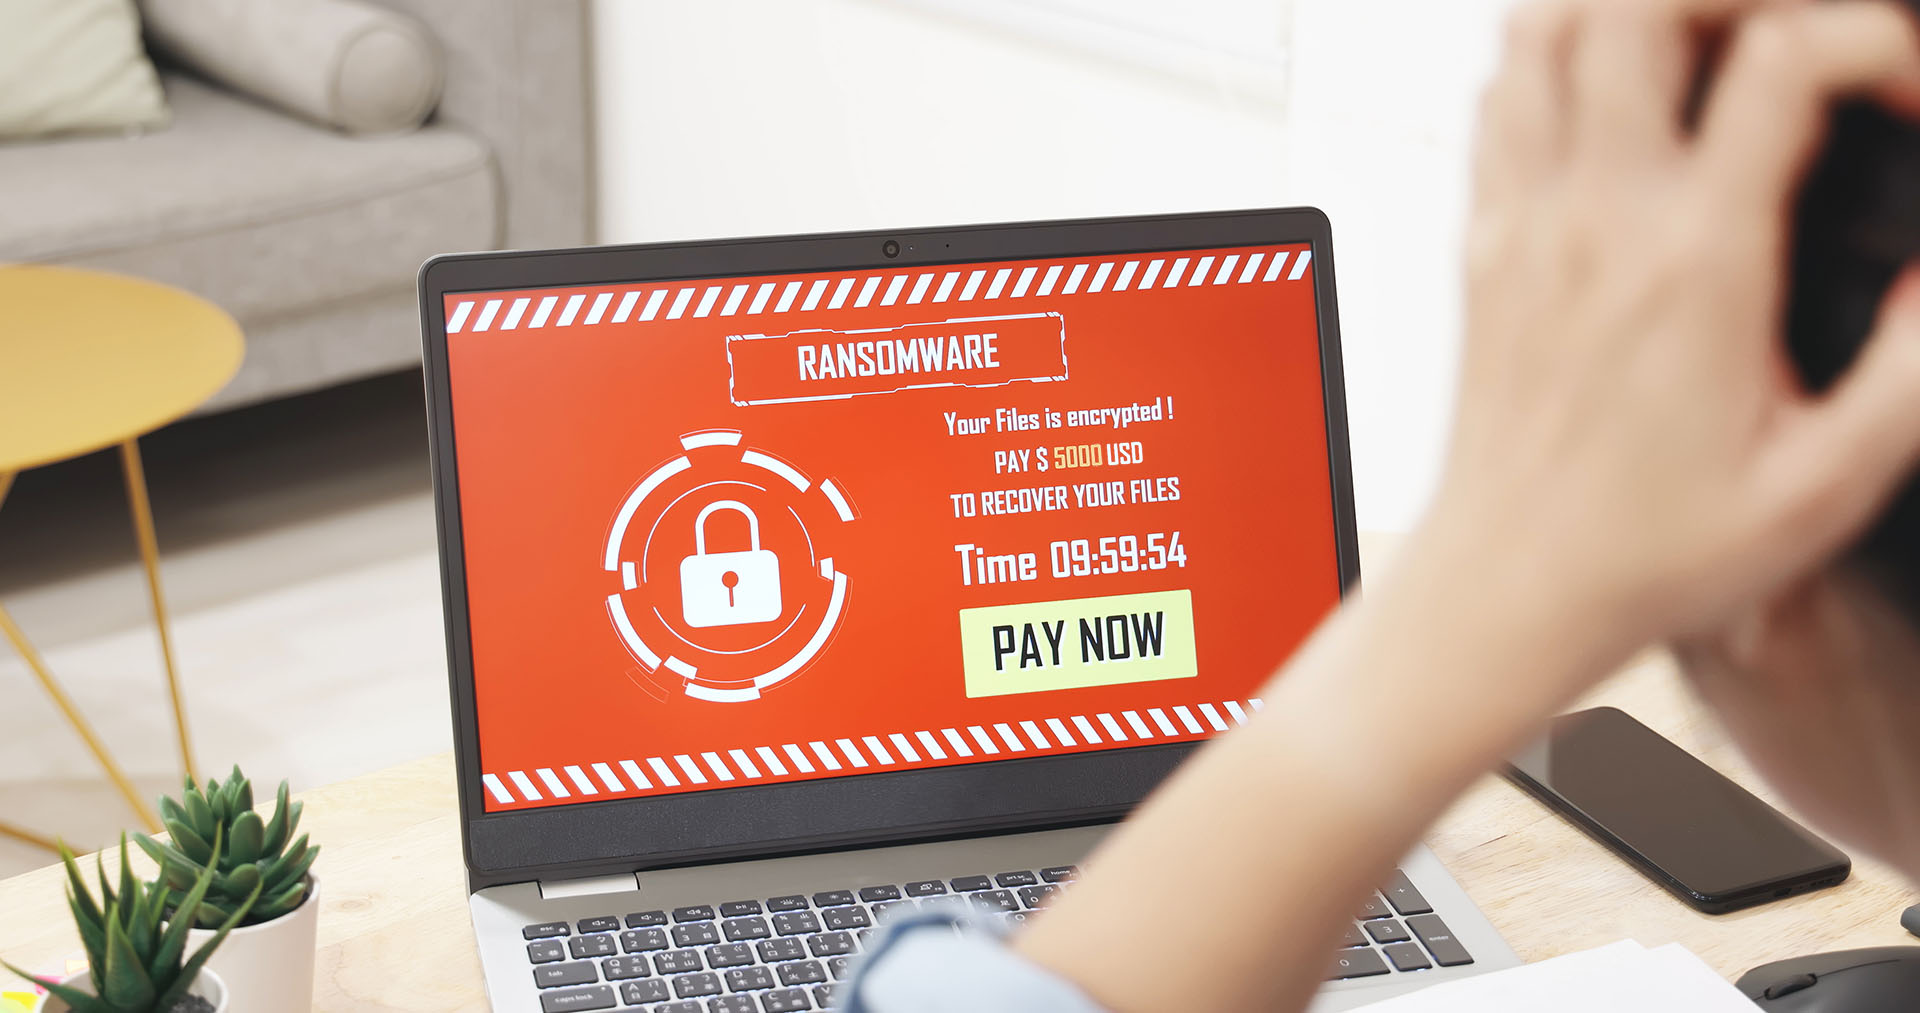 3things to prevent ransomware